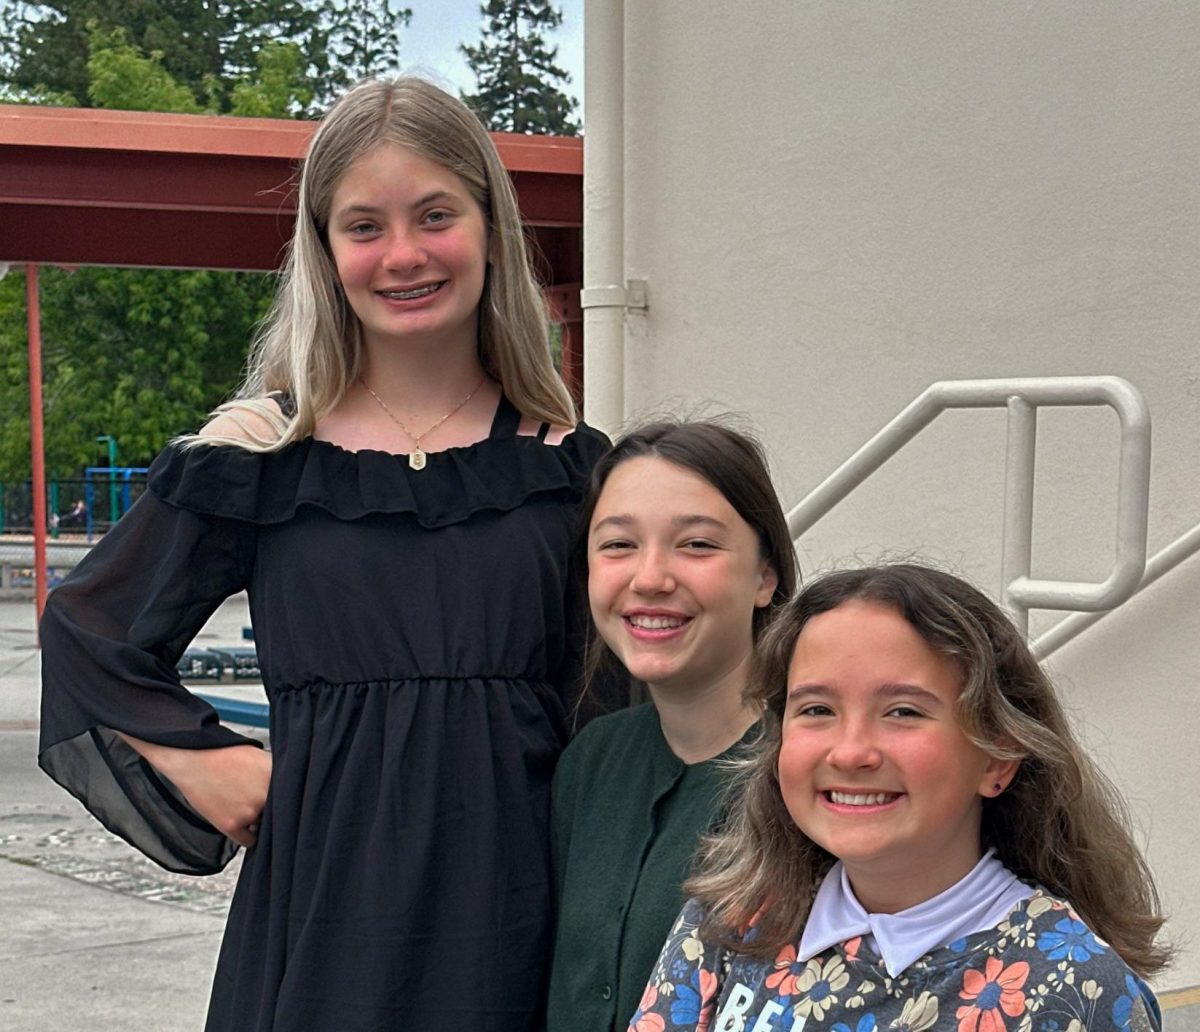 From left to right: Almond Elementary School sixth graders Bailey Bordo, Maya Stern and Chloe Renz sit together outside Almond. 